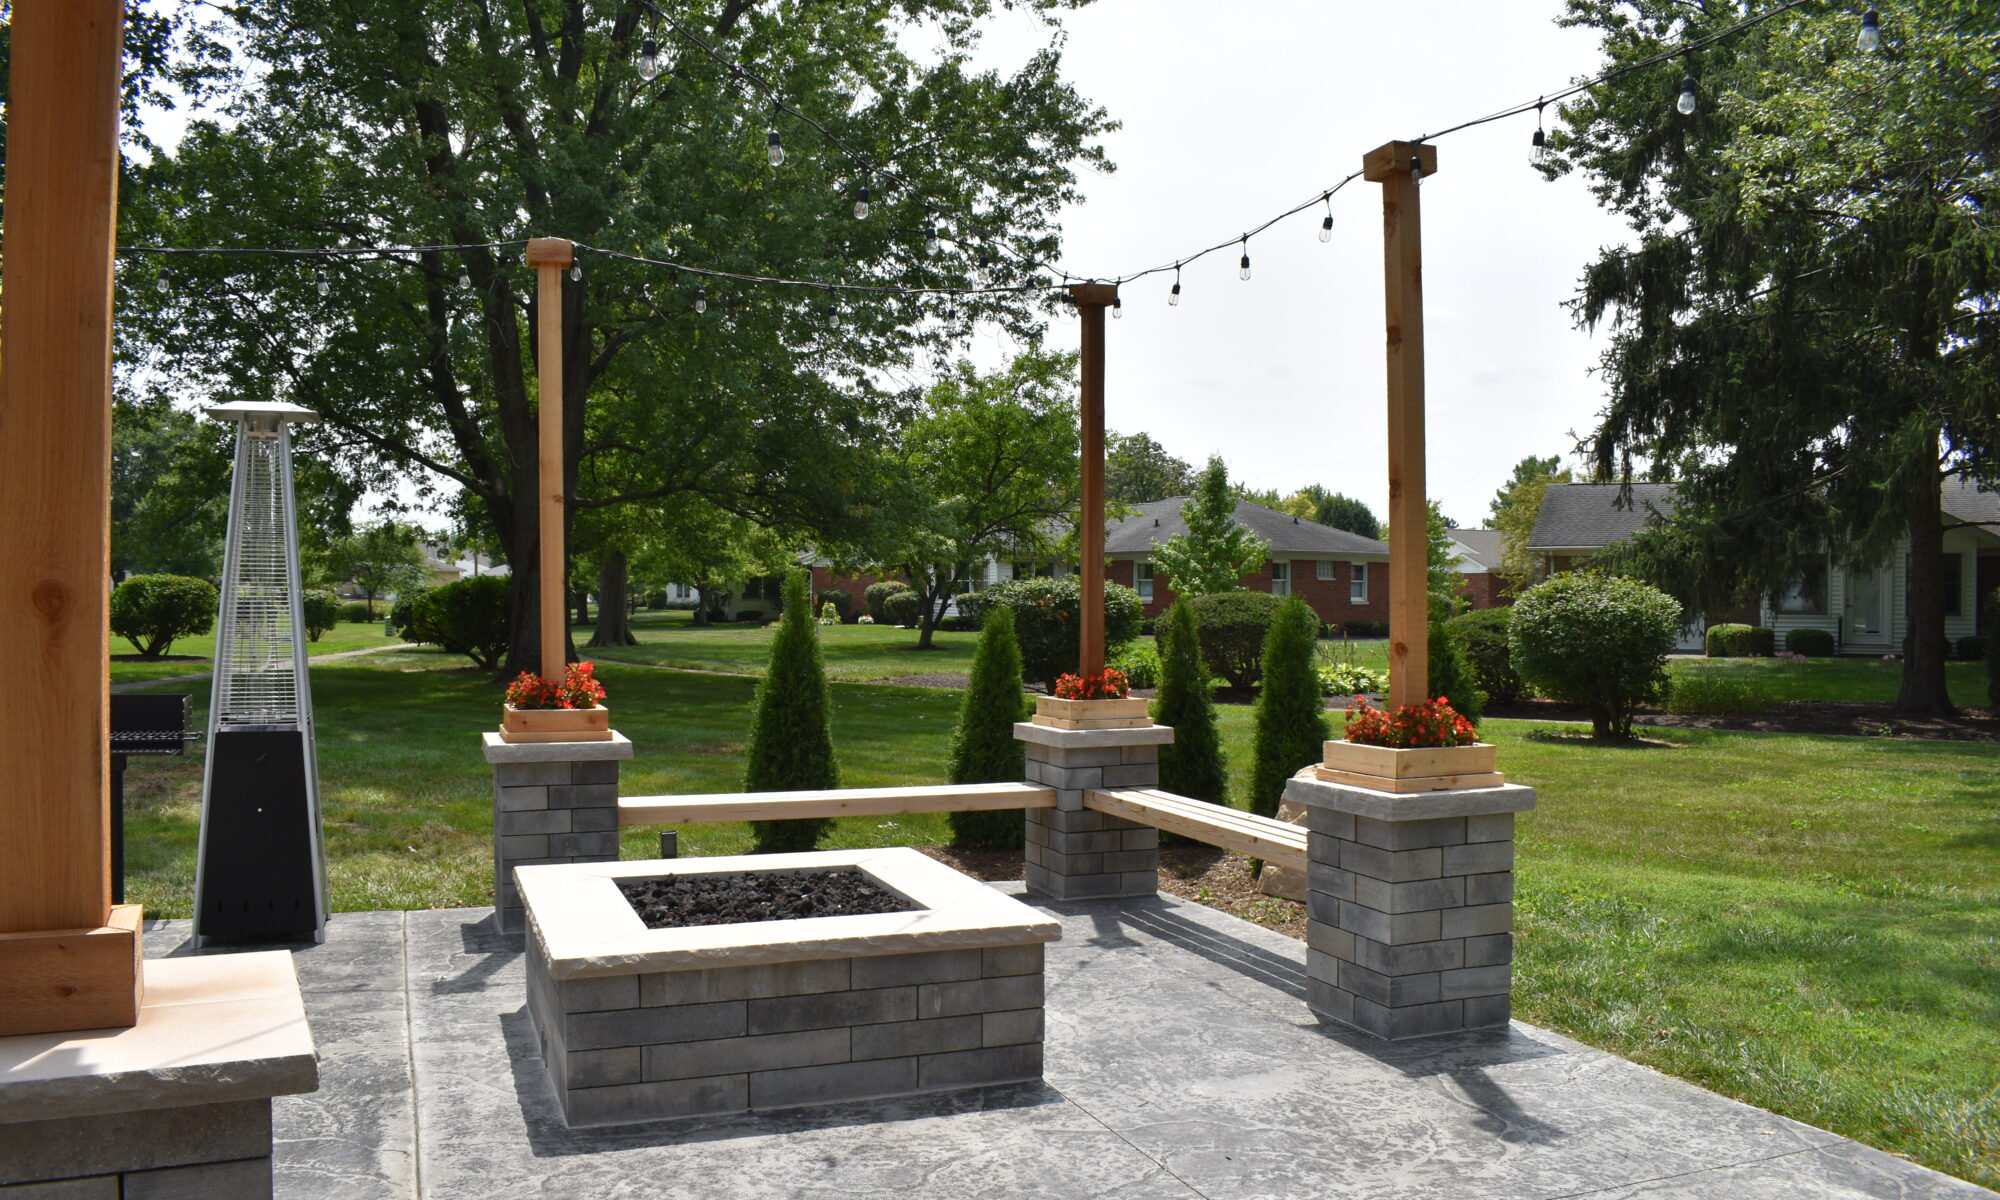 Precision Outdoors Greenwood Indiana Smock Courtyard senior living community large pergola arborvitae bubbling boulder water feature fountain propane fire pit seating corner propane heaters heat source custom landscaping flowers mulch night lighting string lights grill propane heaters flowers shared living space exterior design and build perfectly manicured turf